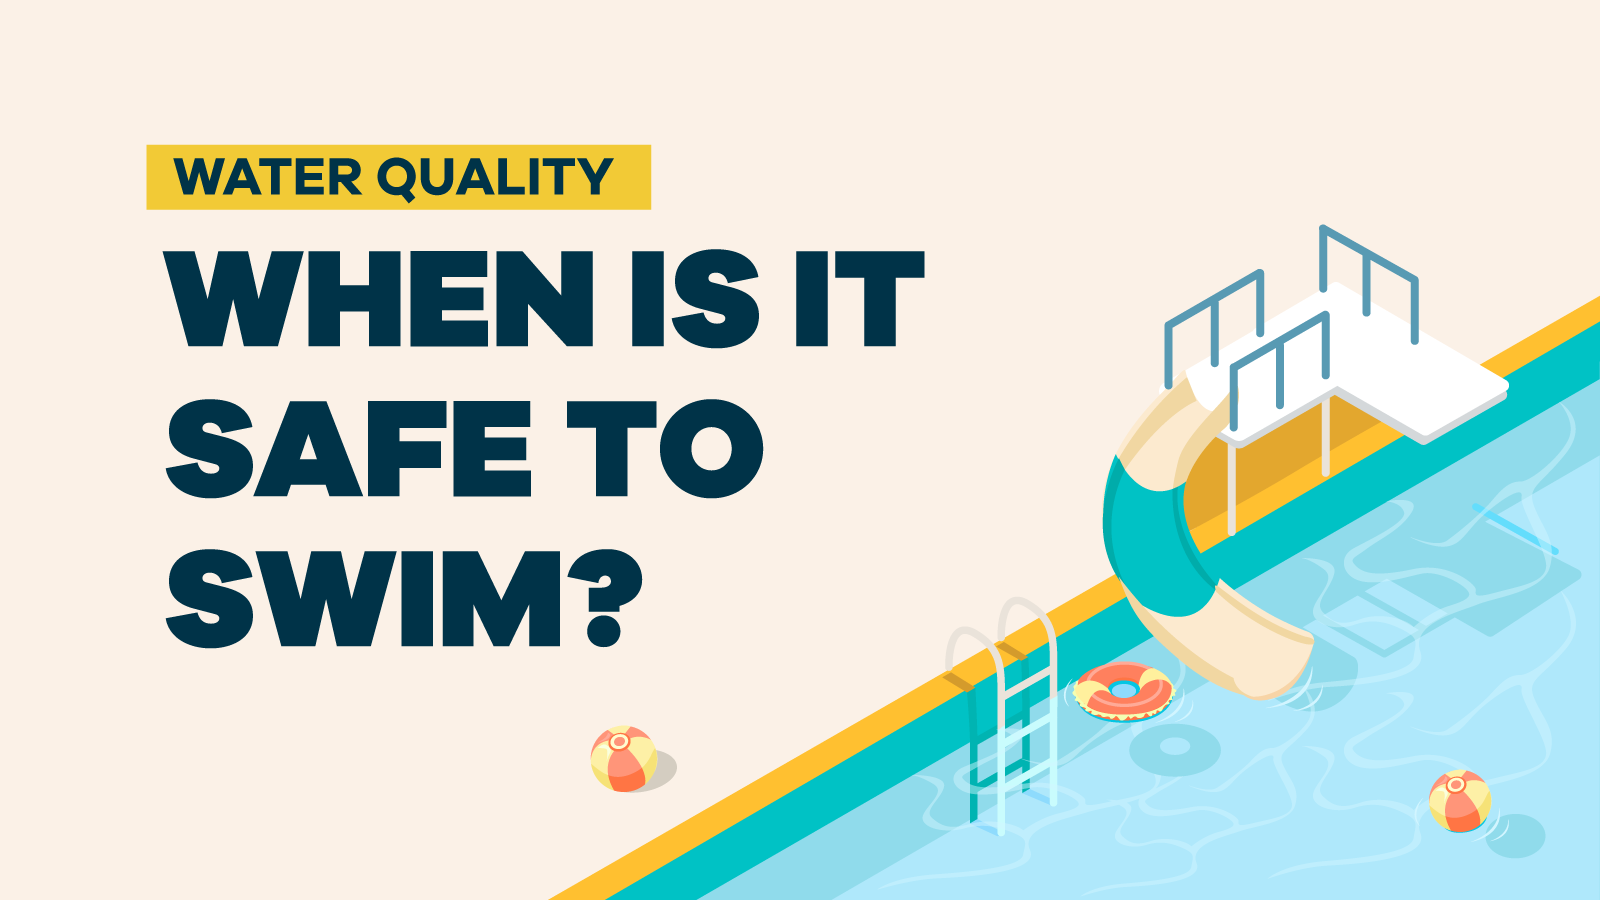 Healthy Swimming/Recreational Water, Healthy Swimming, Healthy Water